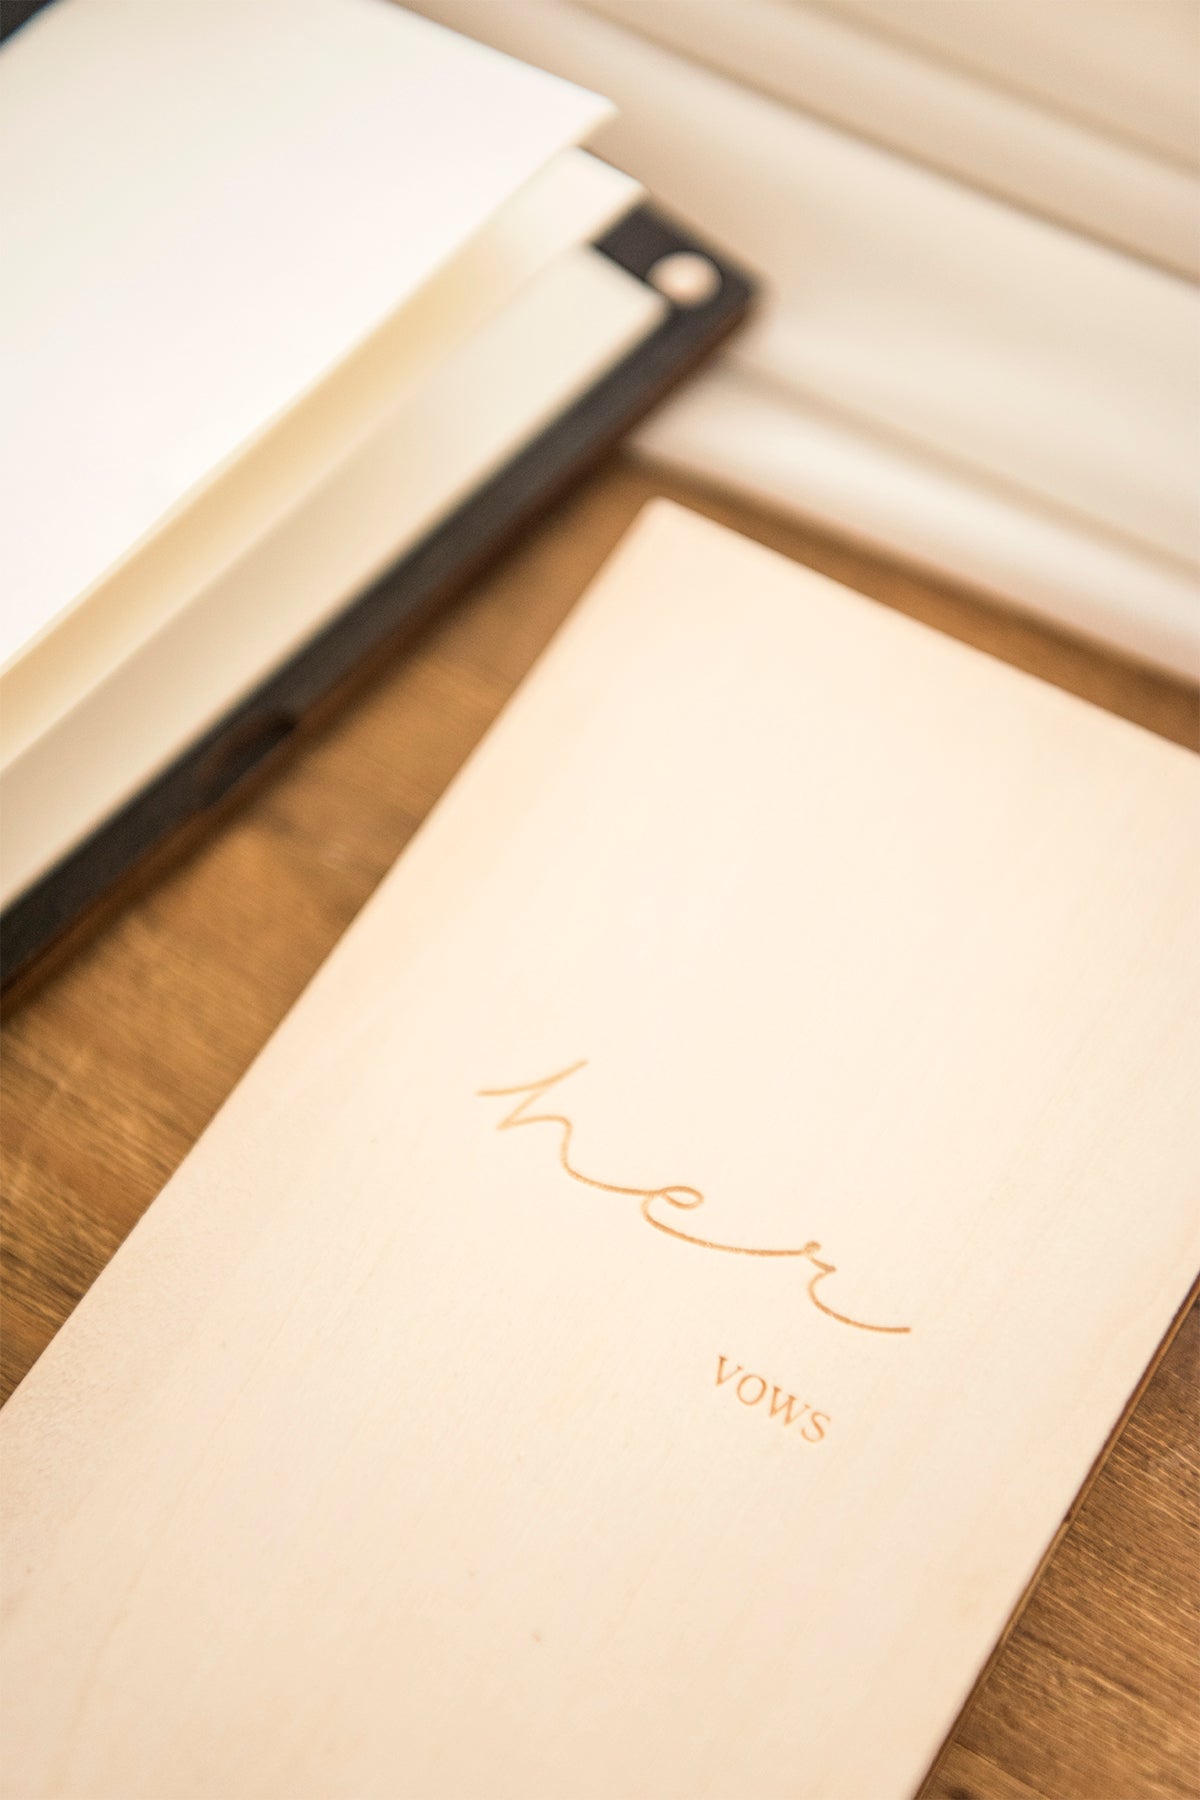 Handmade Wooden Wedding Vows Book His and Her - Ling's moment